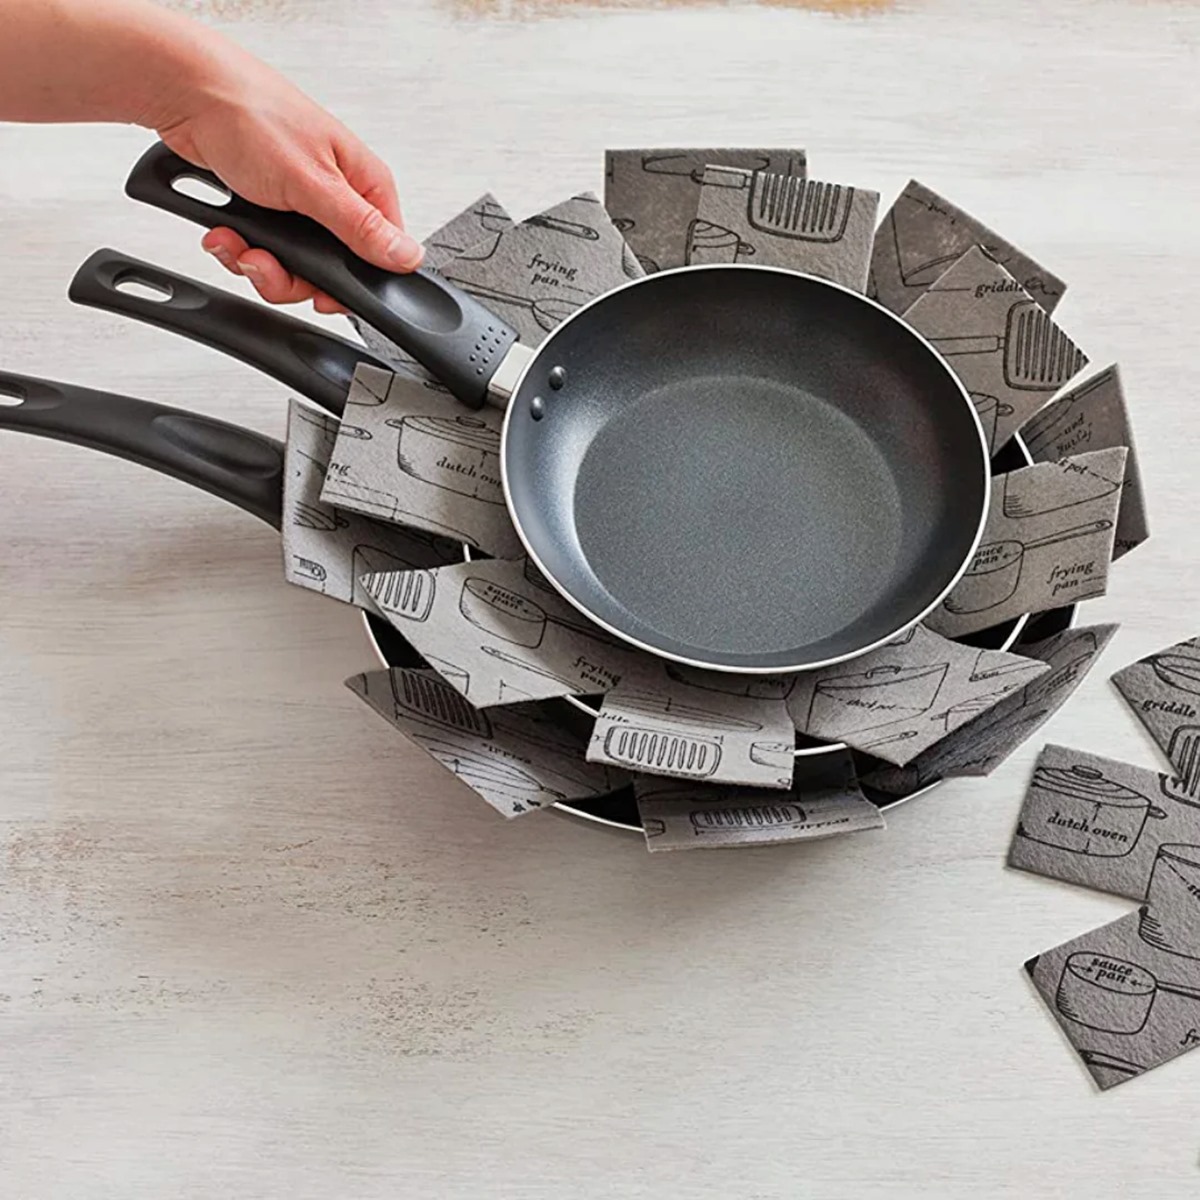 How To Use Cookware Protectors? Expert Tips For Prolonging Your Pots’ And Pans’ Life!